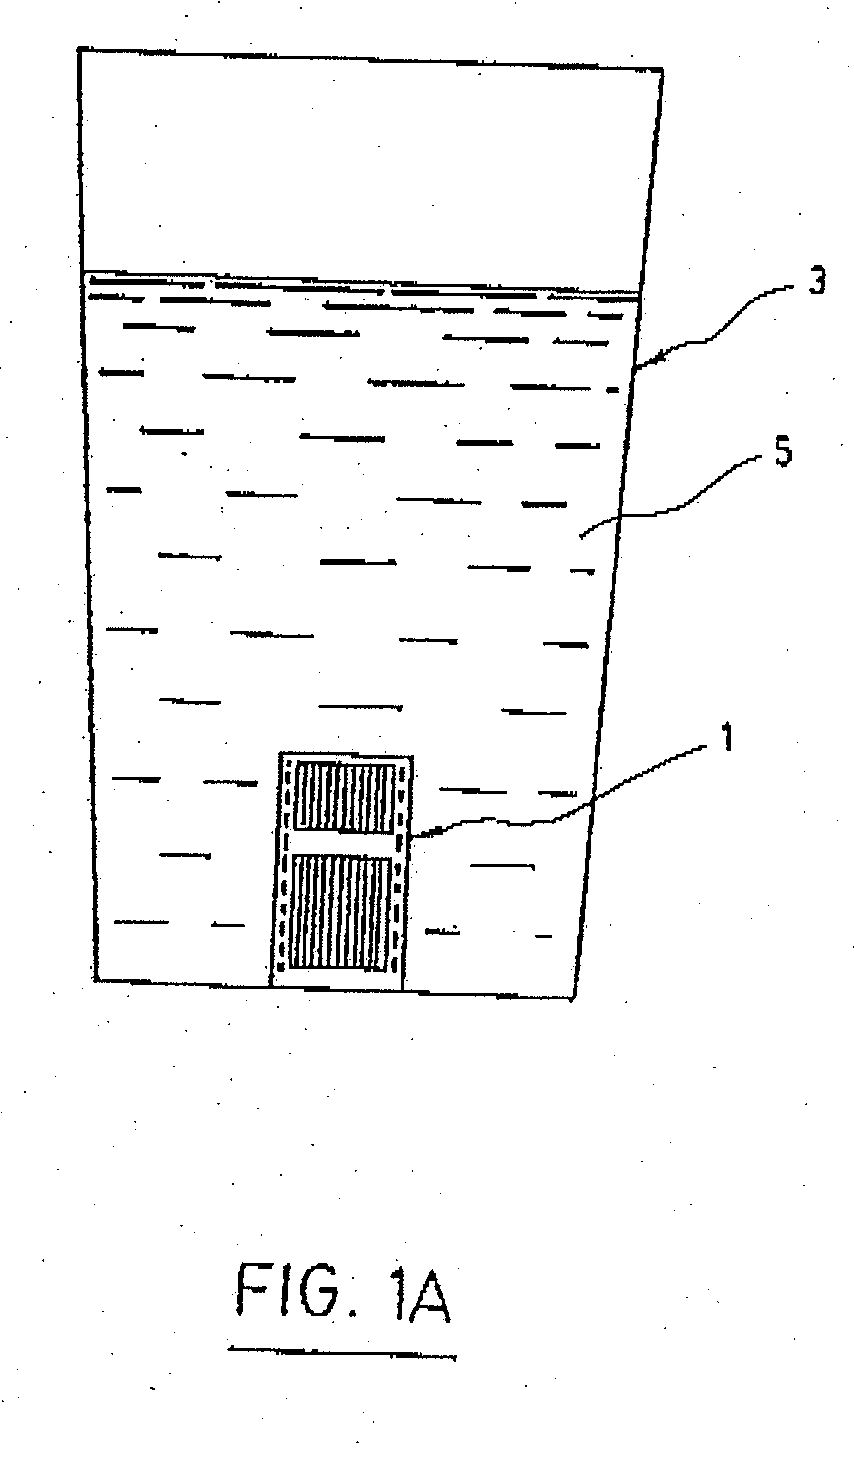 Miniature ozone generator and use thereof for purifying water